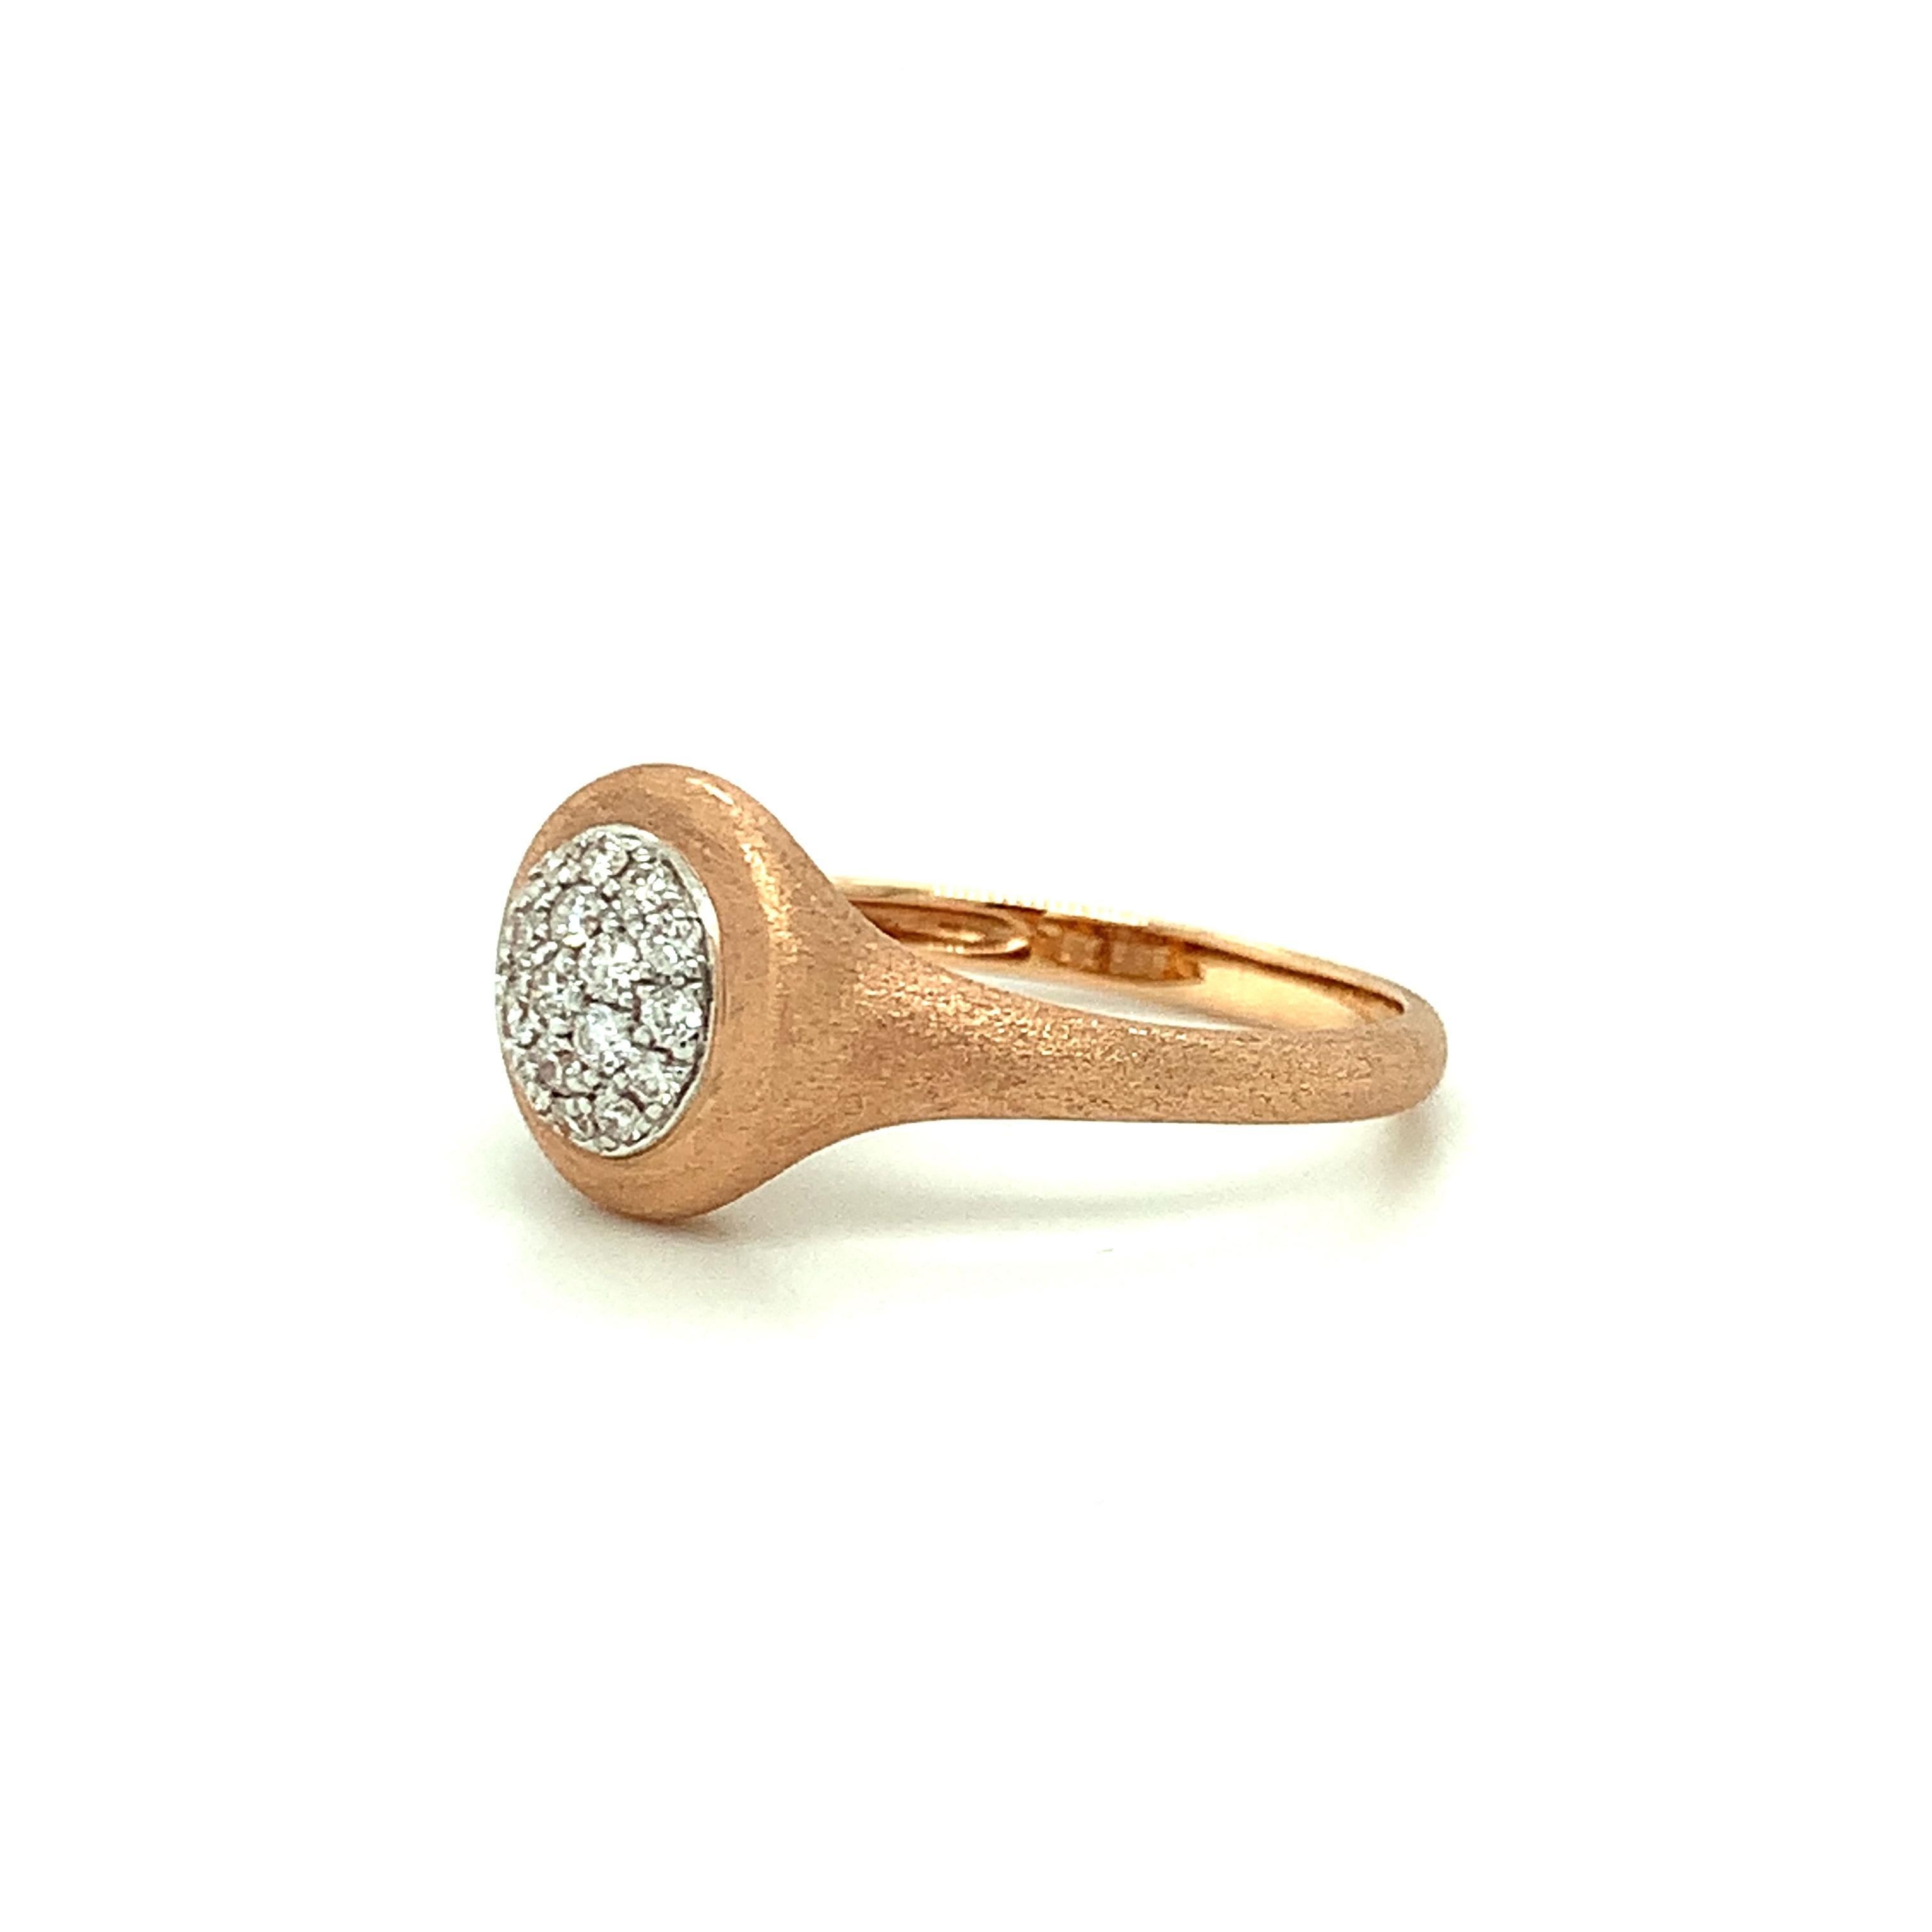 Artisan Diamond Pave Cocktail Ring in White and Brushed Rose Gold, .22 Carat Total For Sale